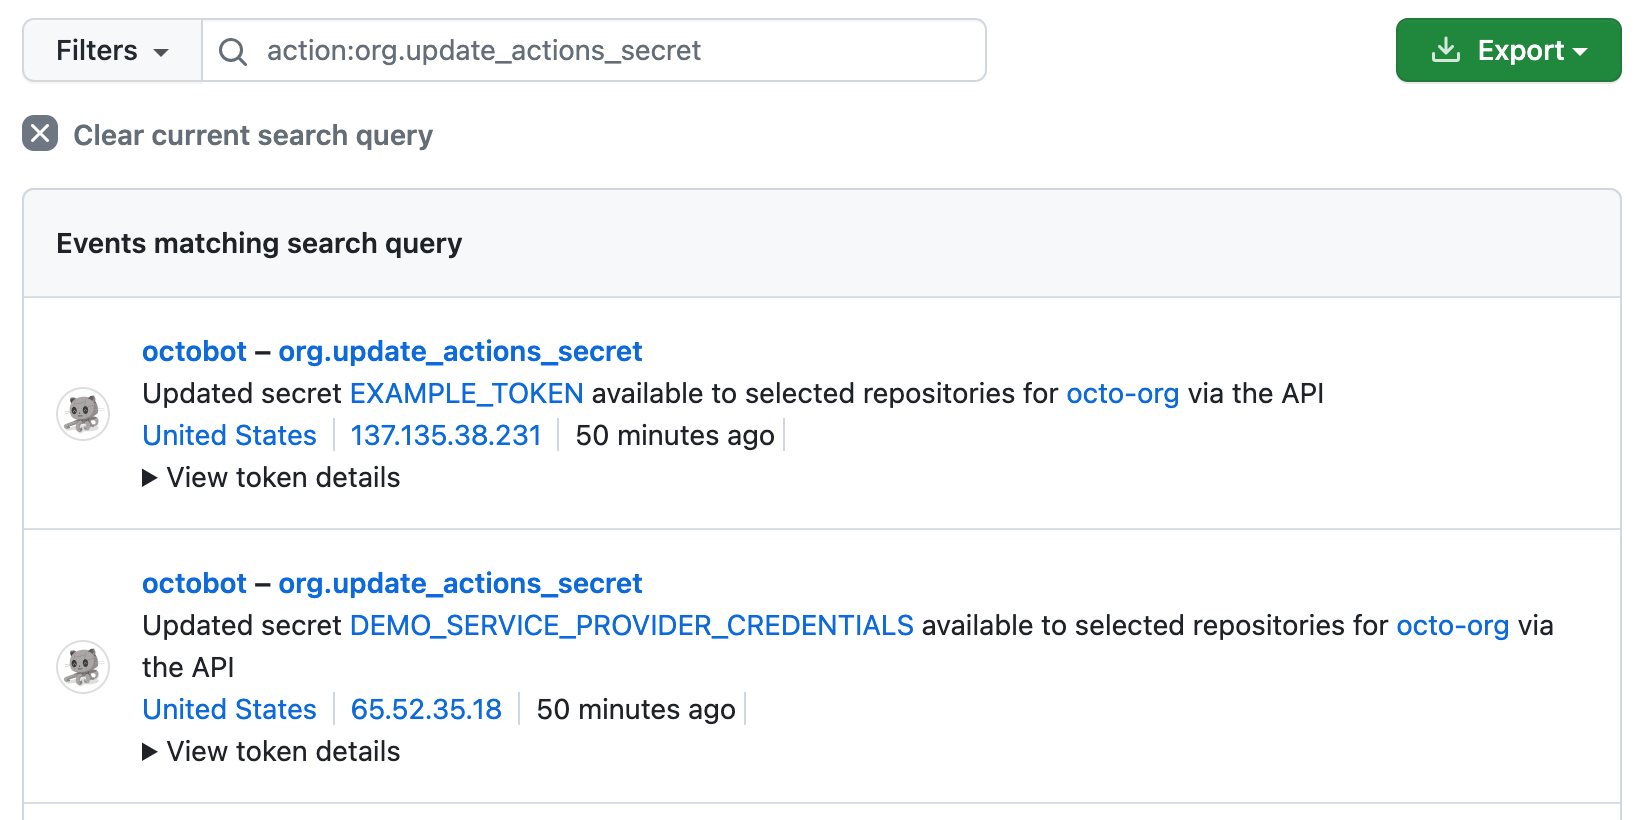 Screenshot showing a search for "action:org.update_actions_secret" in the audit log for an organization. Two results are shown.